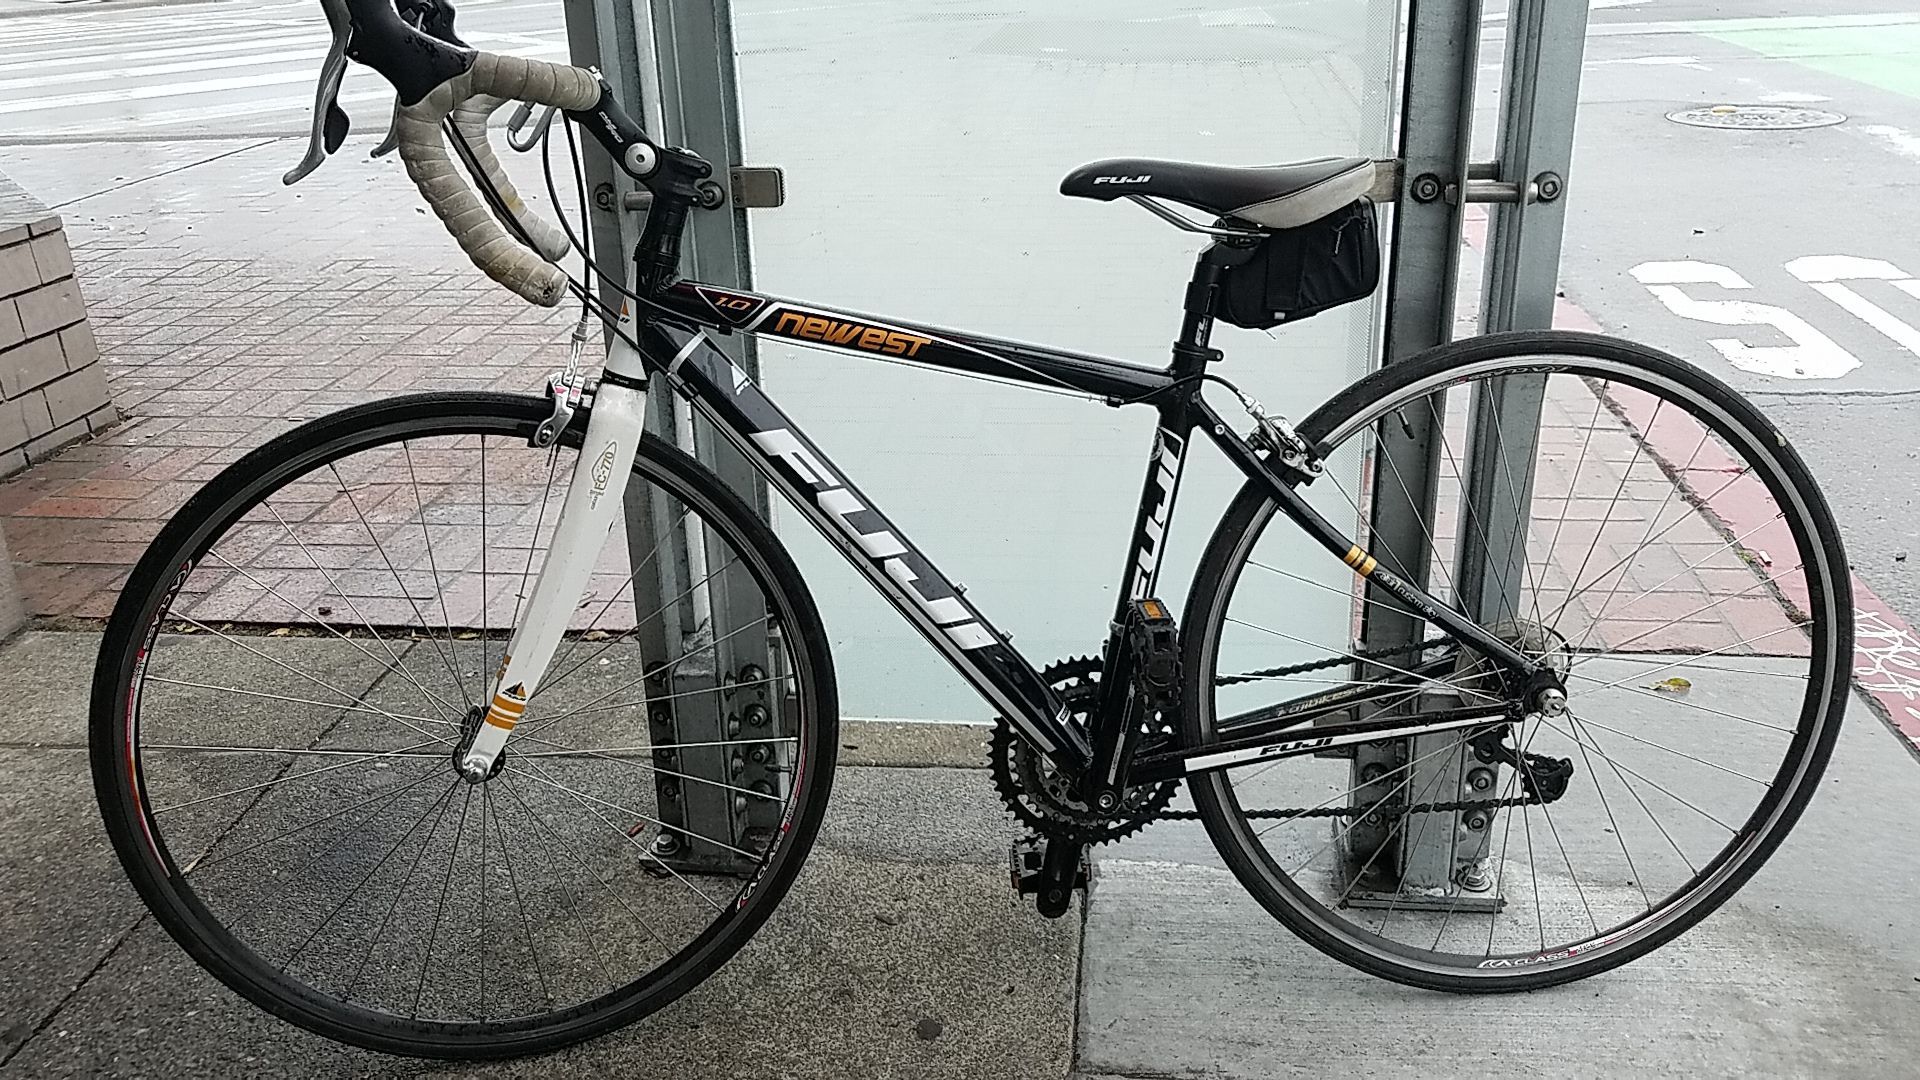 Fuji Fc 770 Bonded Carbon Class A Bike For Sale In San Francisco Ca Offerup